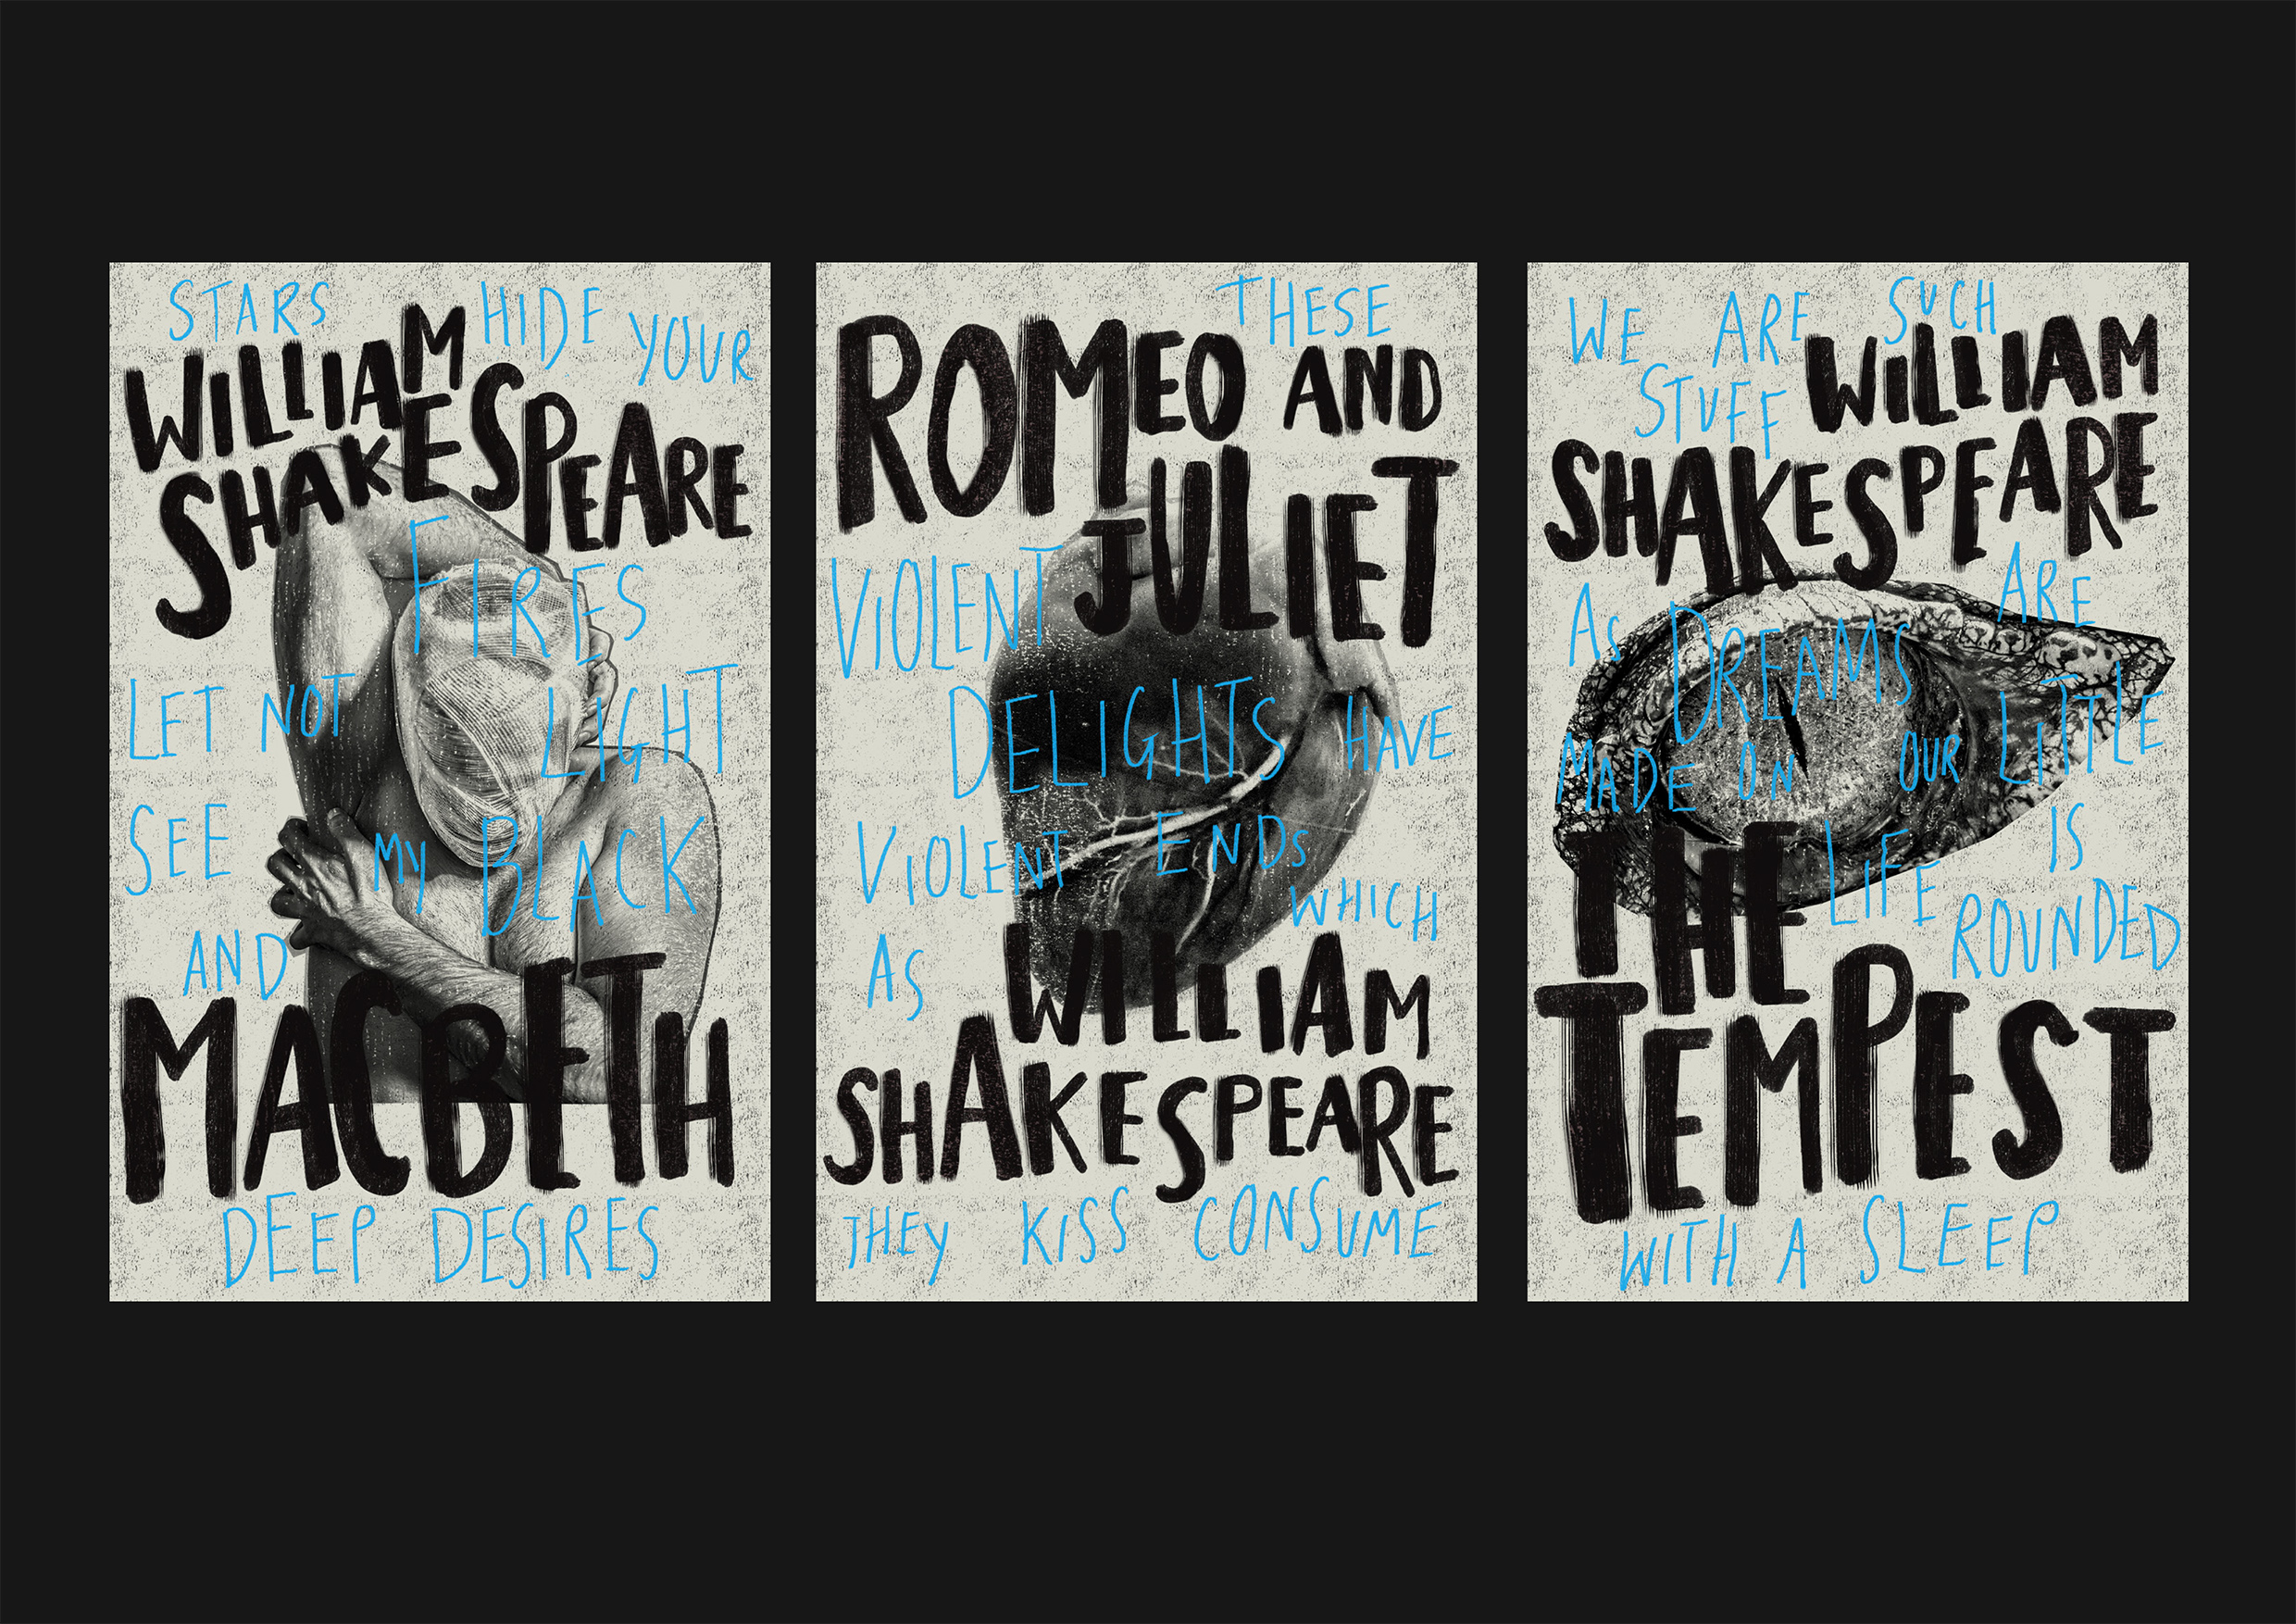 A series of book covers based on plays by Shakespeare created by Daisy woods. A eerie typographic treatment is used as the main design.